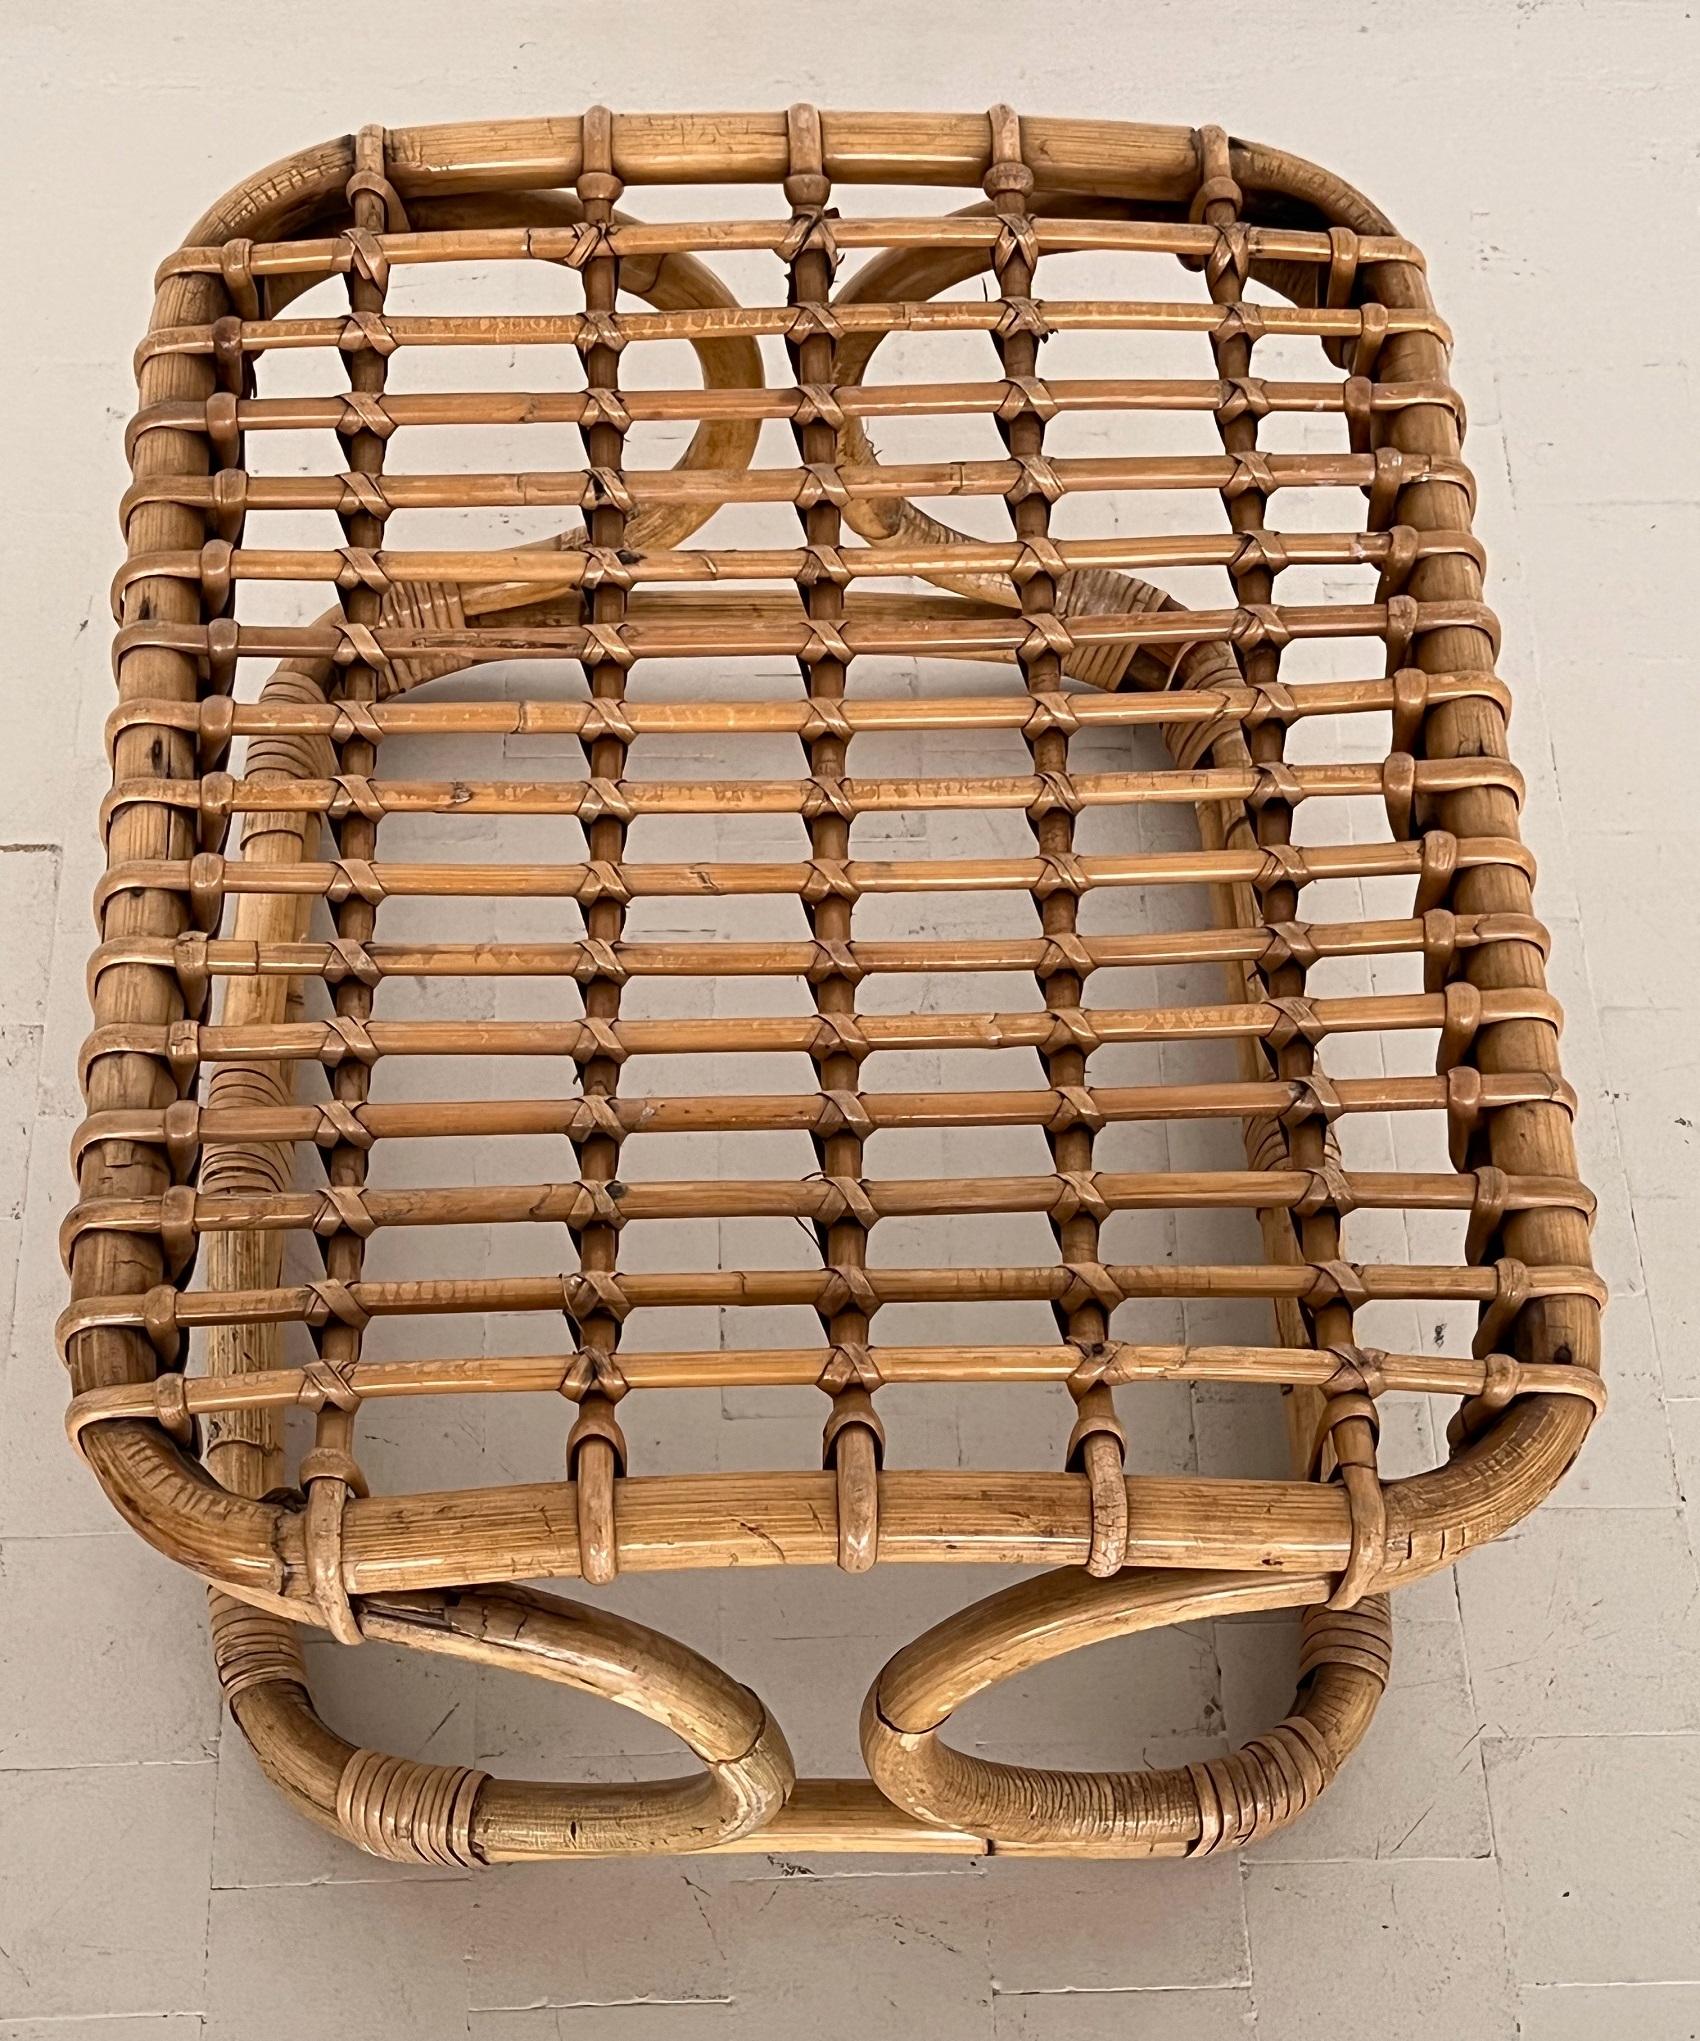 Italian Midcentury Stool in Bamboo Rattan by Tito Agnoli, 1960s For Sale 1